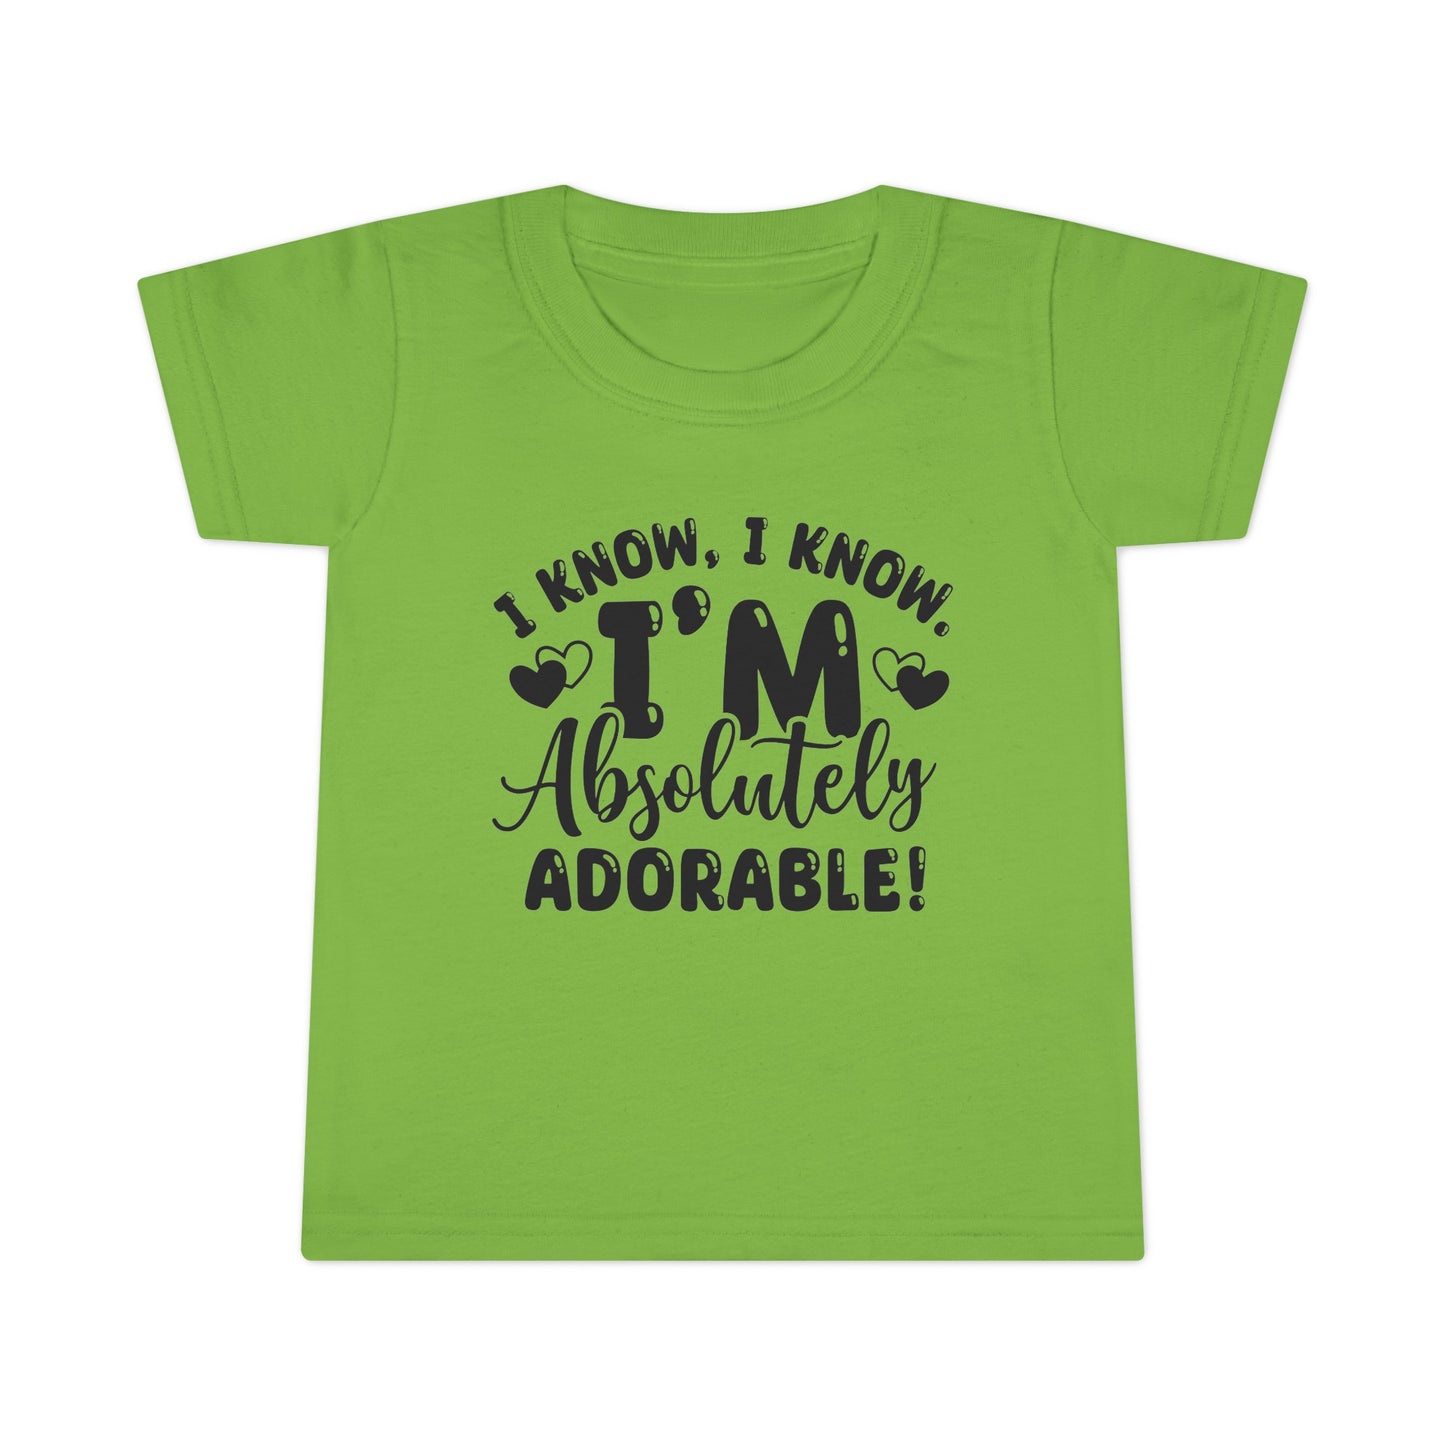 "Absolutely Adorable" Toddler T-shirt